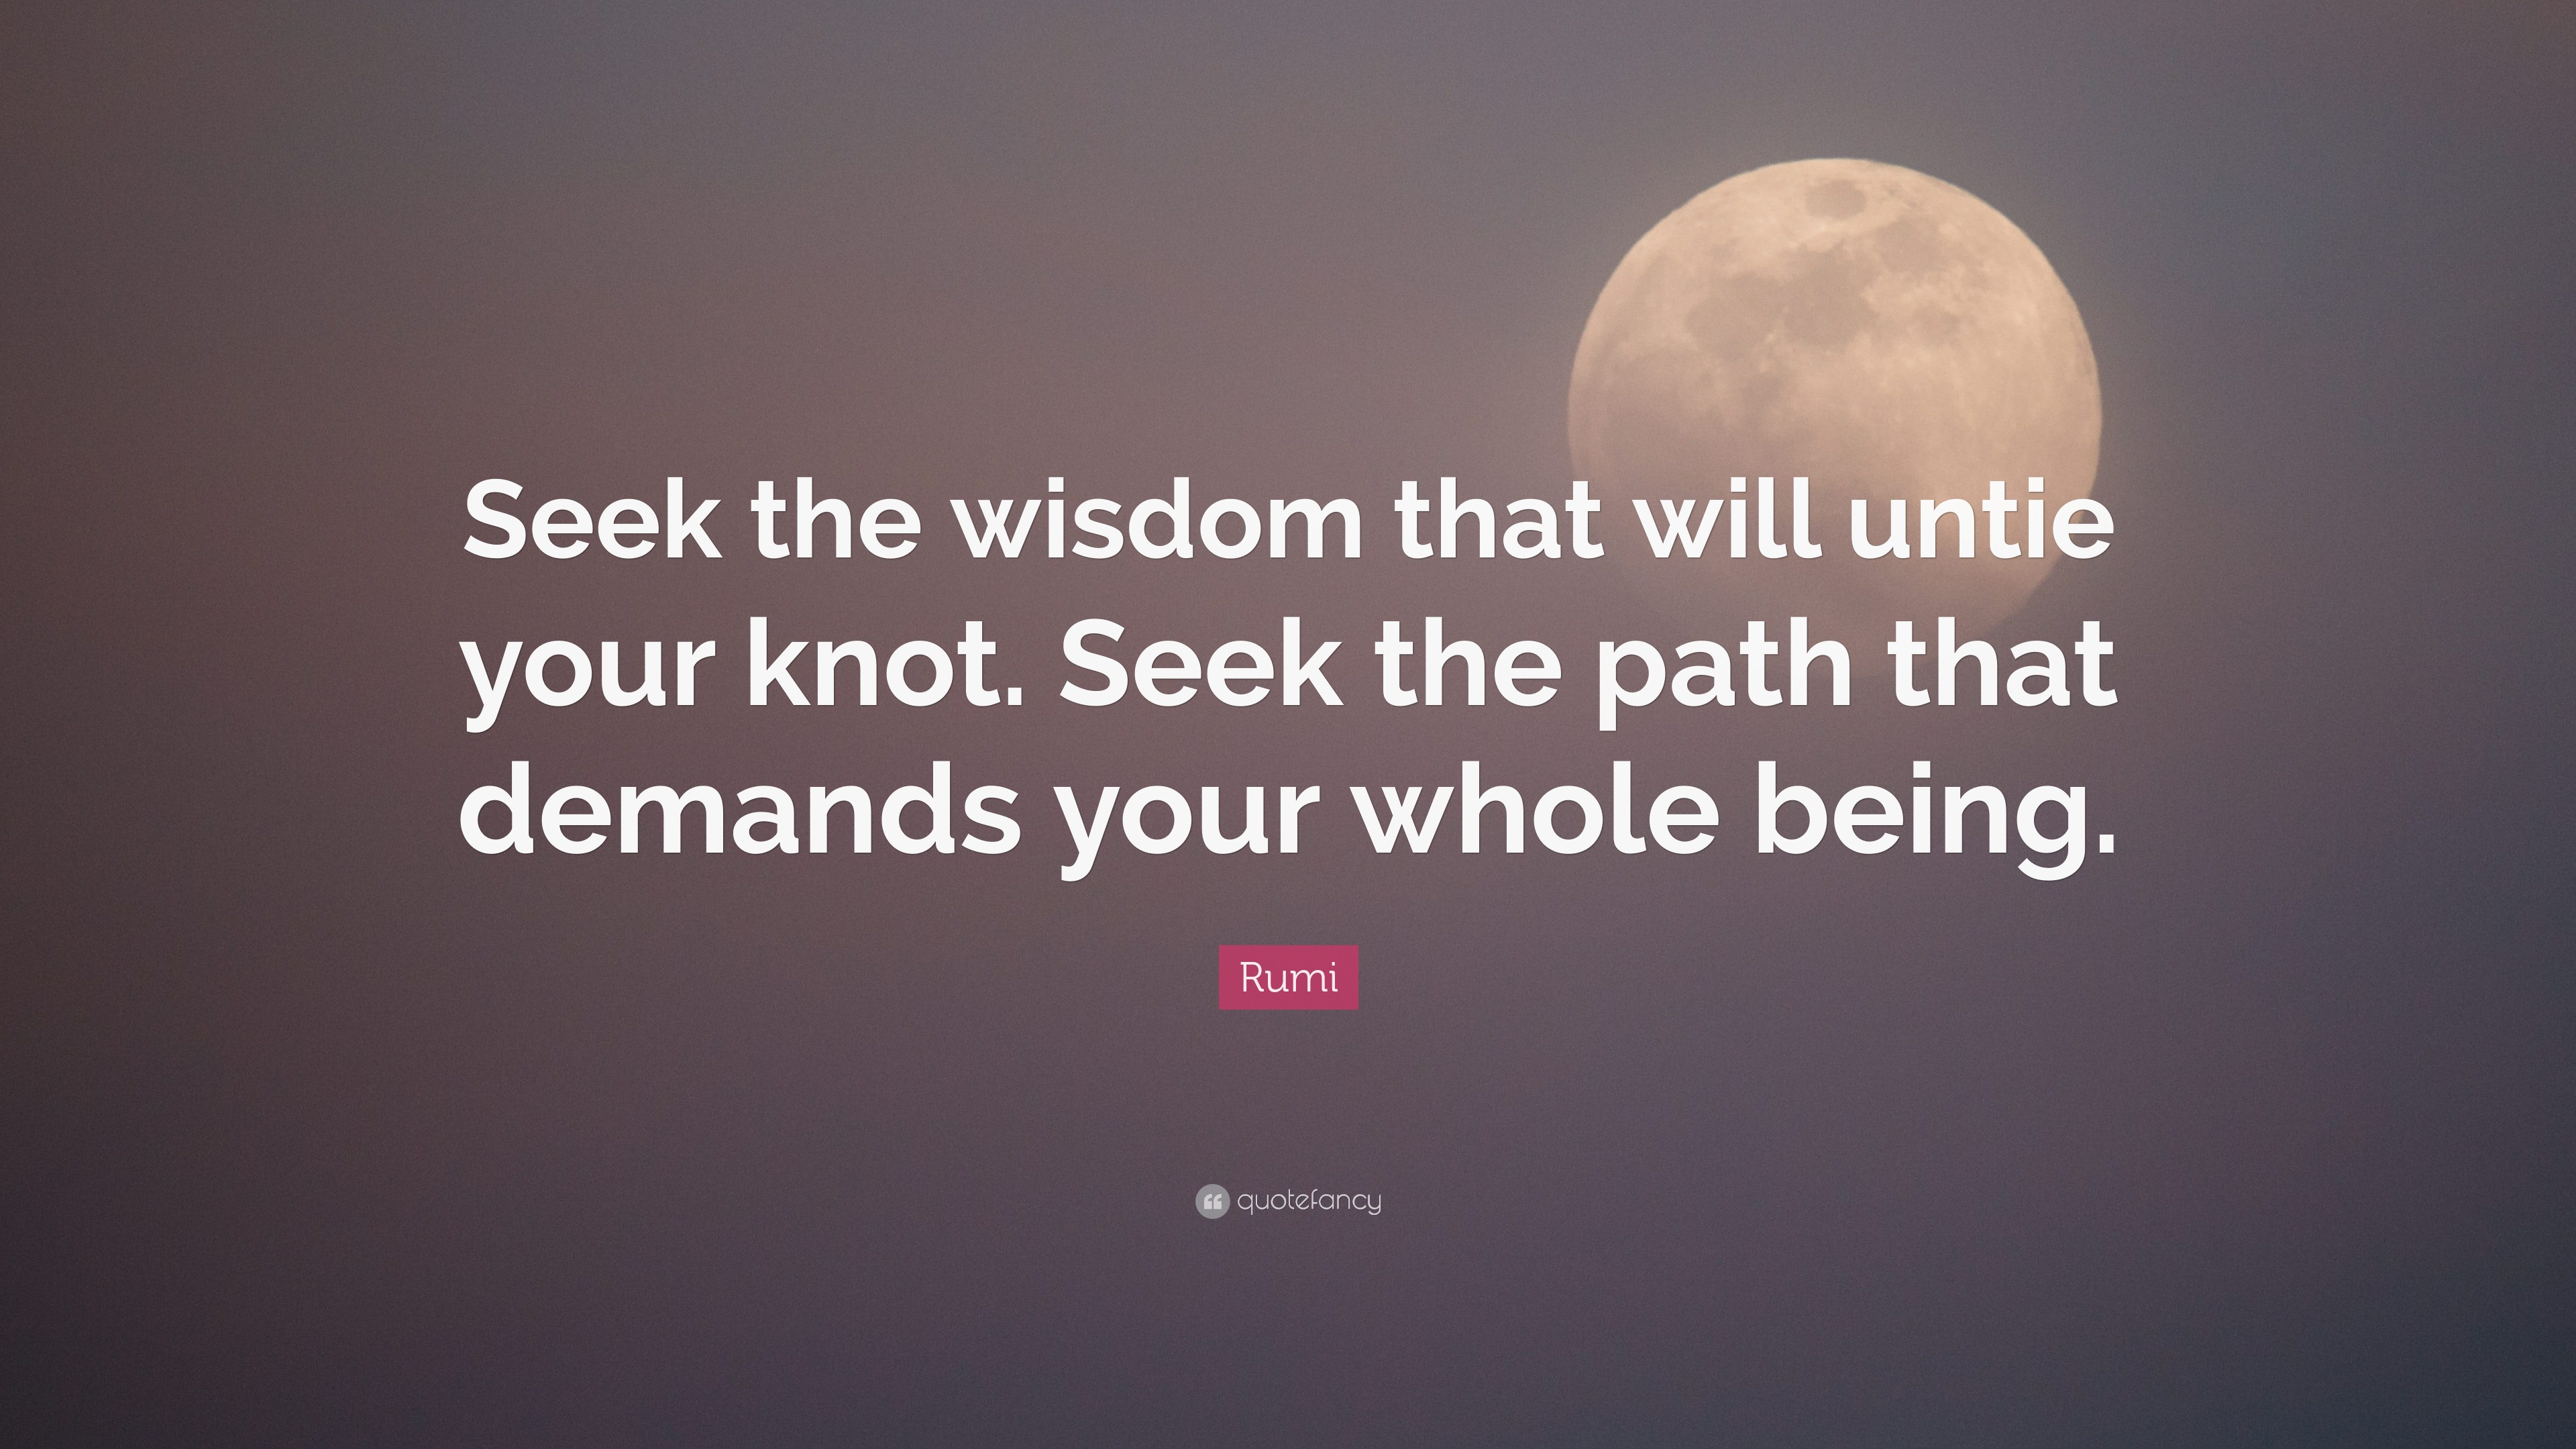 Rumi Quote: “Seek the wisdom that will untie your knot. Seek the path ...